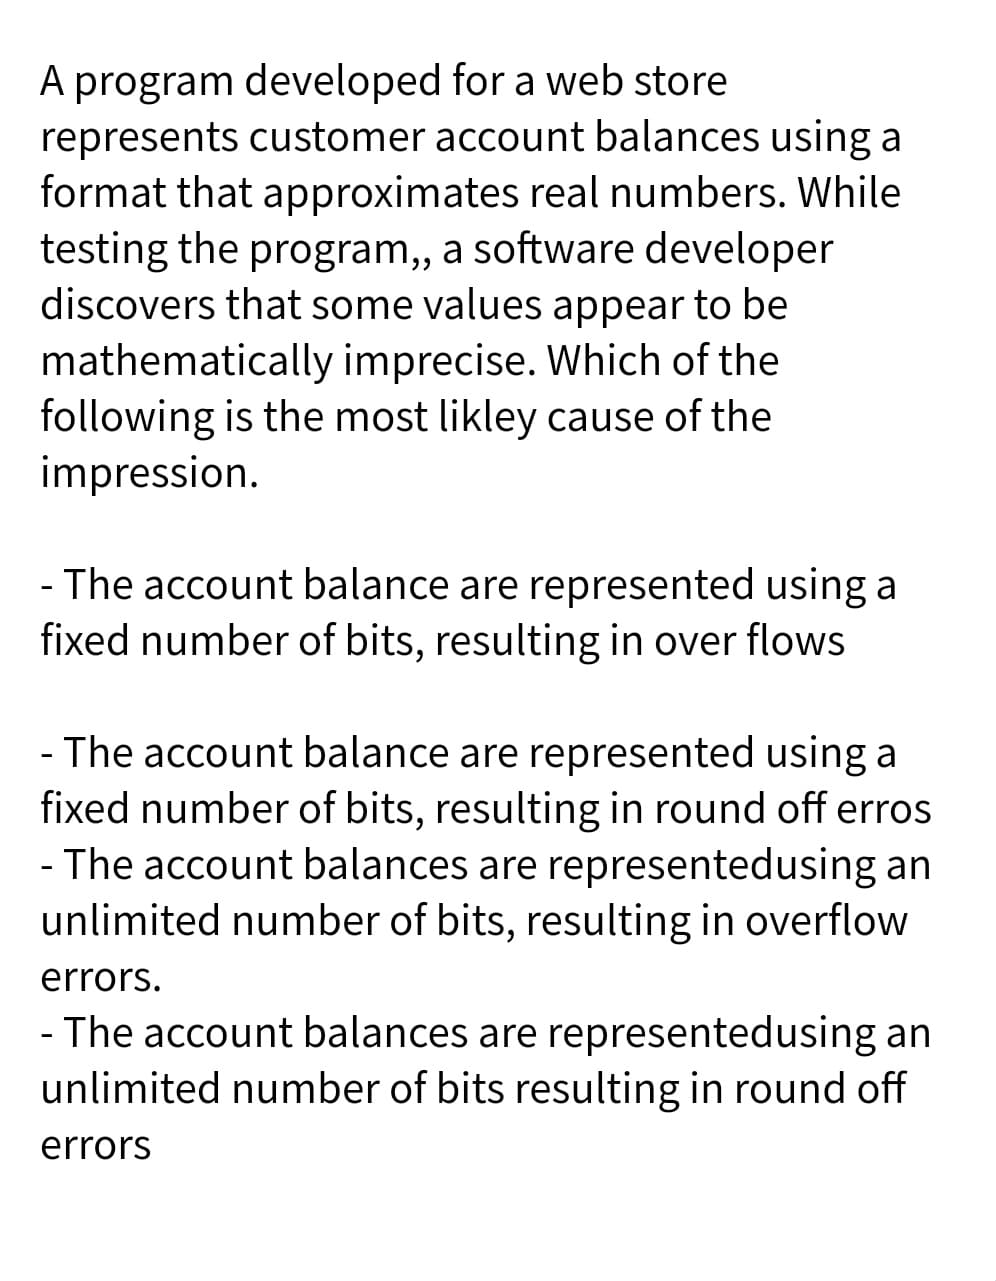 A program developed for a web store
represents customer account balances using a
format that approximates real numbers. While
testing the program,, a software developer
discovers that some values appear to be
mathematically imprecise. Which of the
following is the most likley cause of the
impression.
- The account balance are represented using a
fixed number of bits, resulting in over flows
- The account balance are represented using a
fixed number of bits, resulting in round off erros
- The account balances are representedusing an
unlimited number of bits, resulting in overflow
errors.
- The account balances are representedusing an
unlimited number of bits resulting in round off
errors
